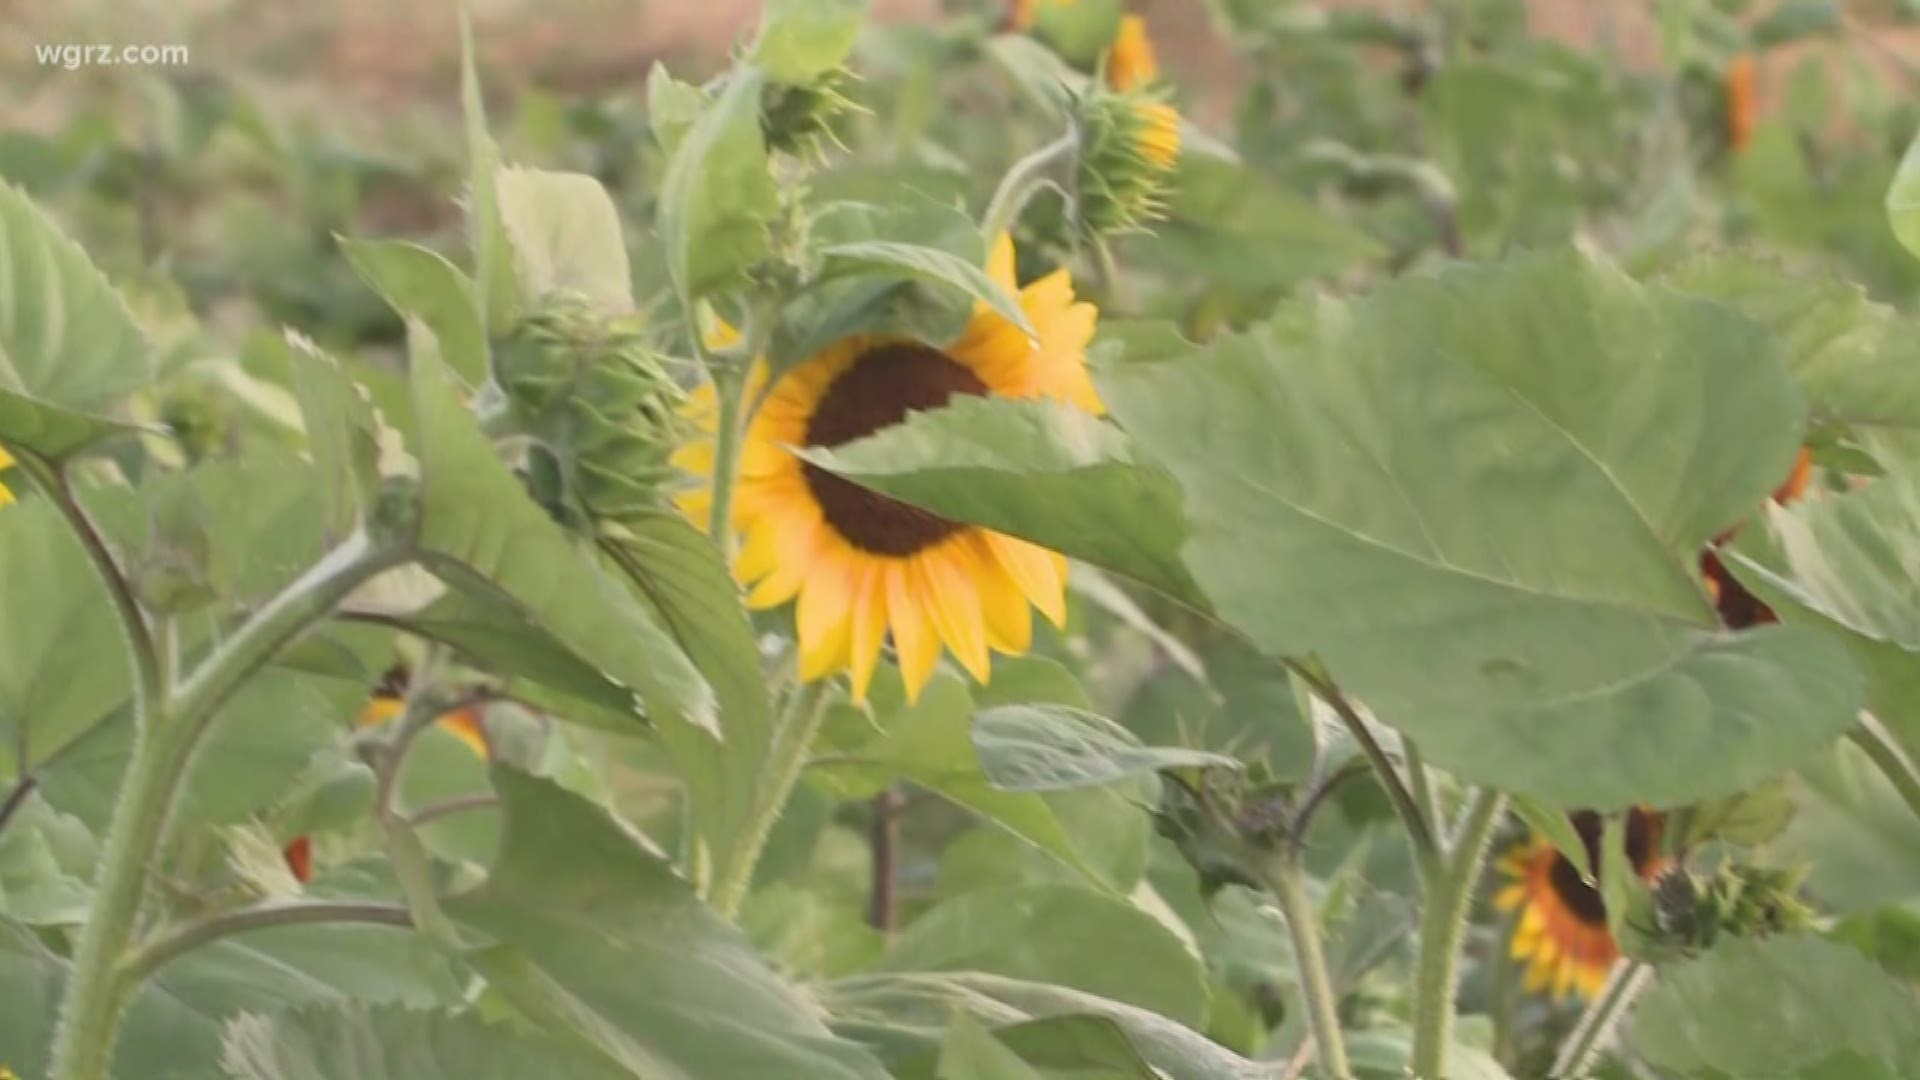 Hundreds of people visited the Sunflowers of Sanborn on opening day